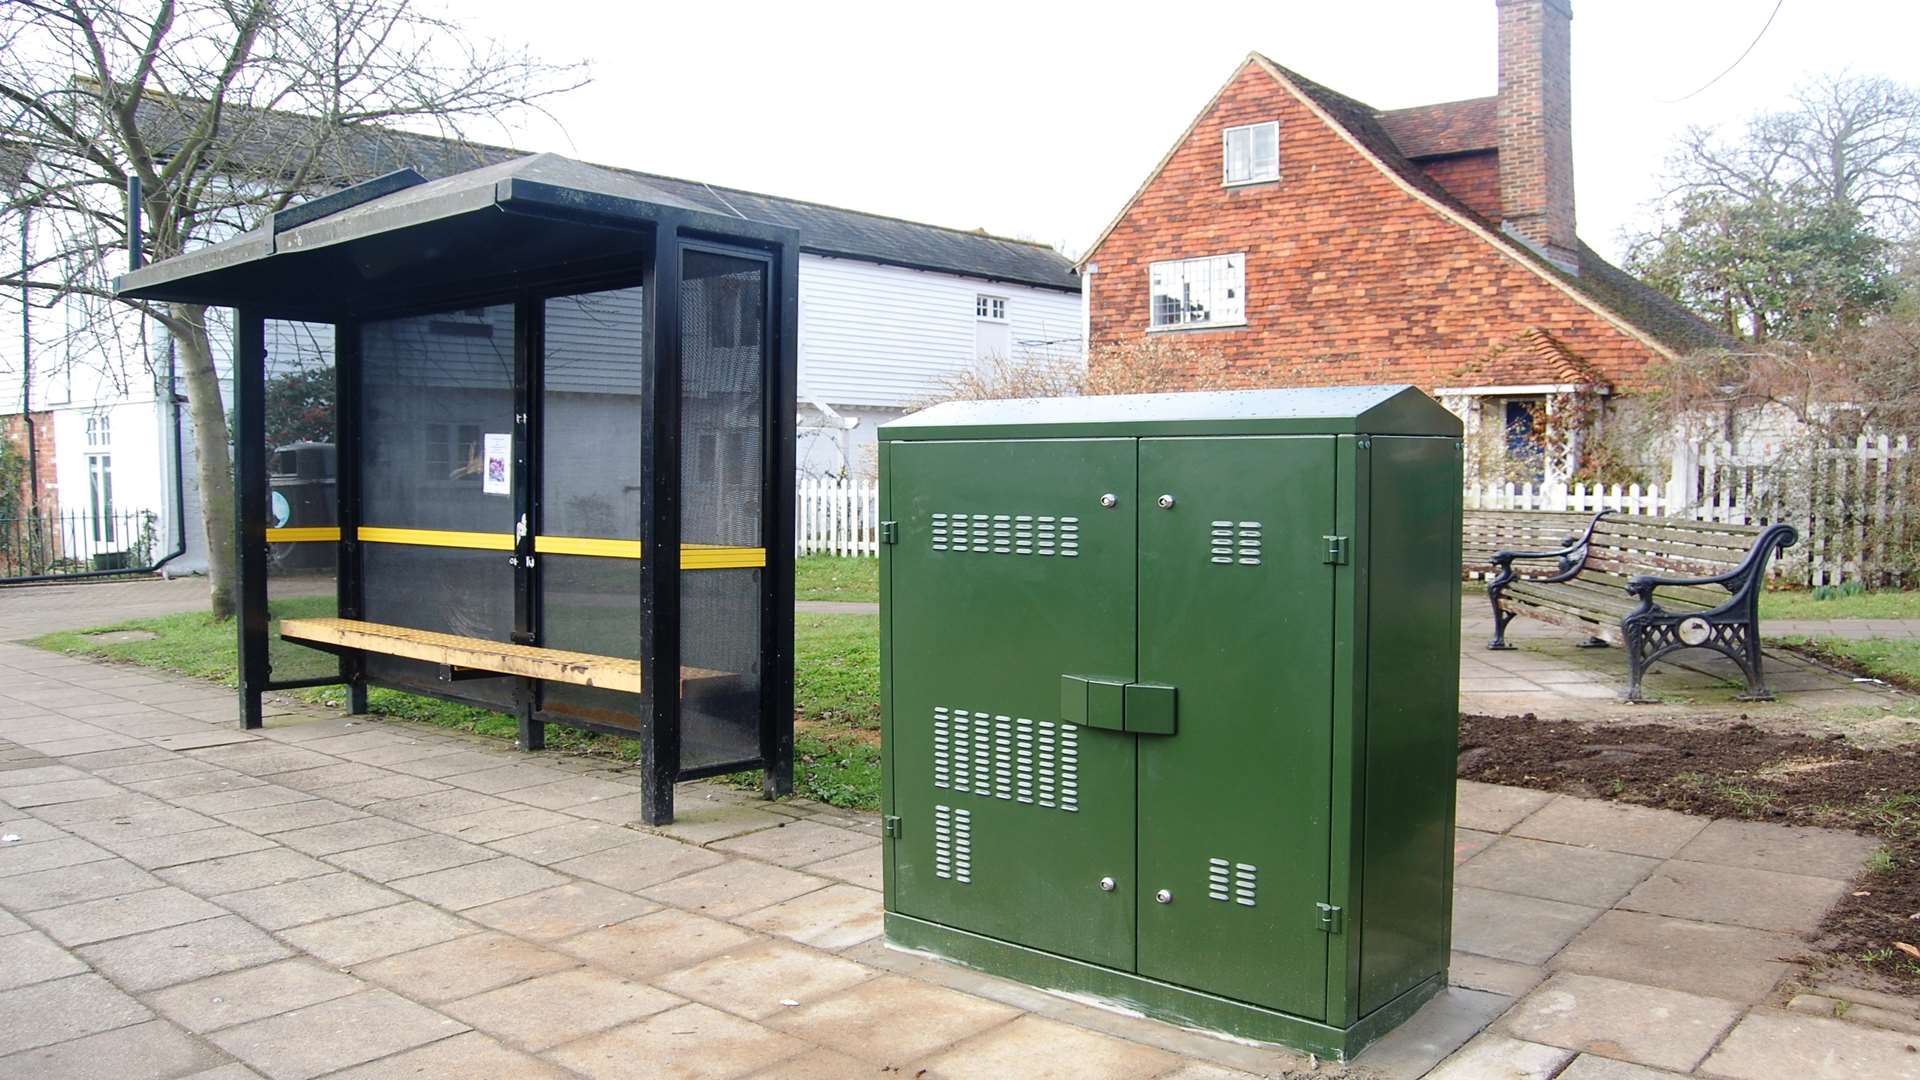 The green box has been fitted in a conservation area